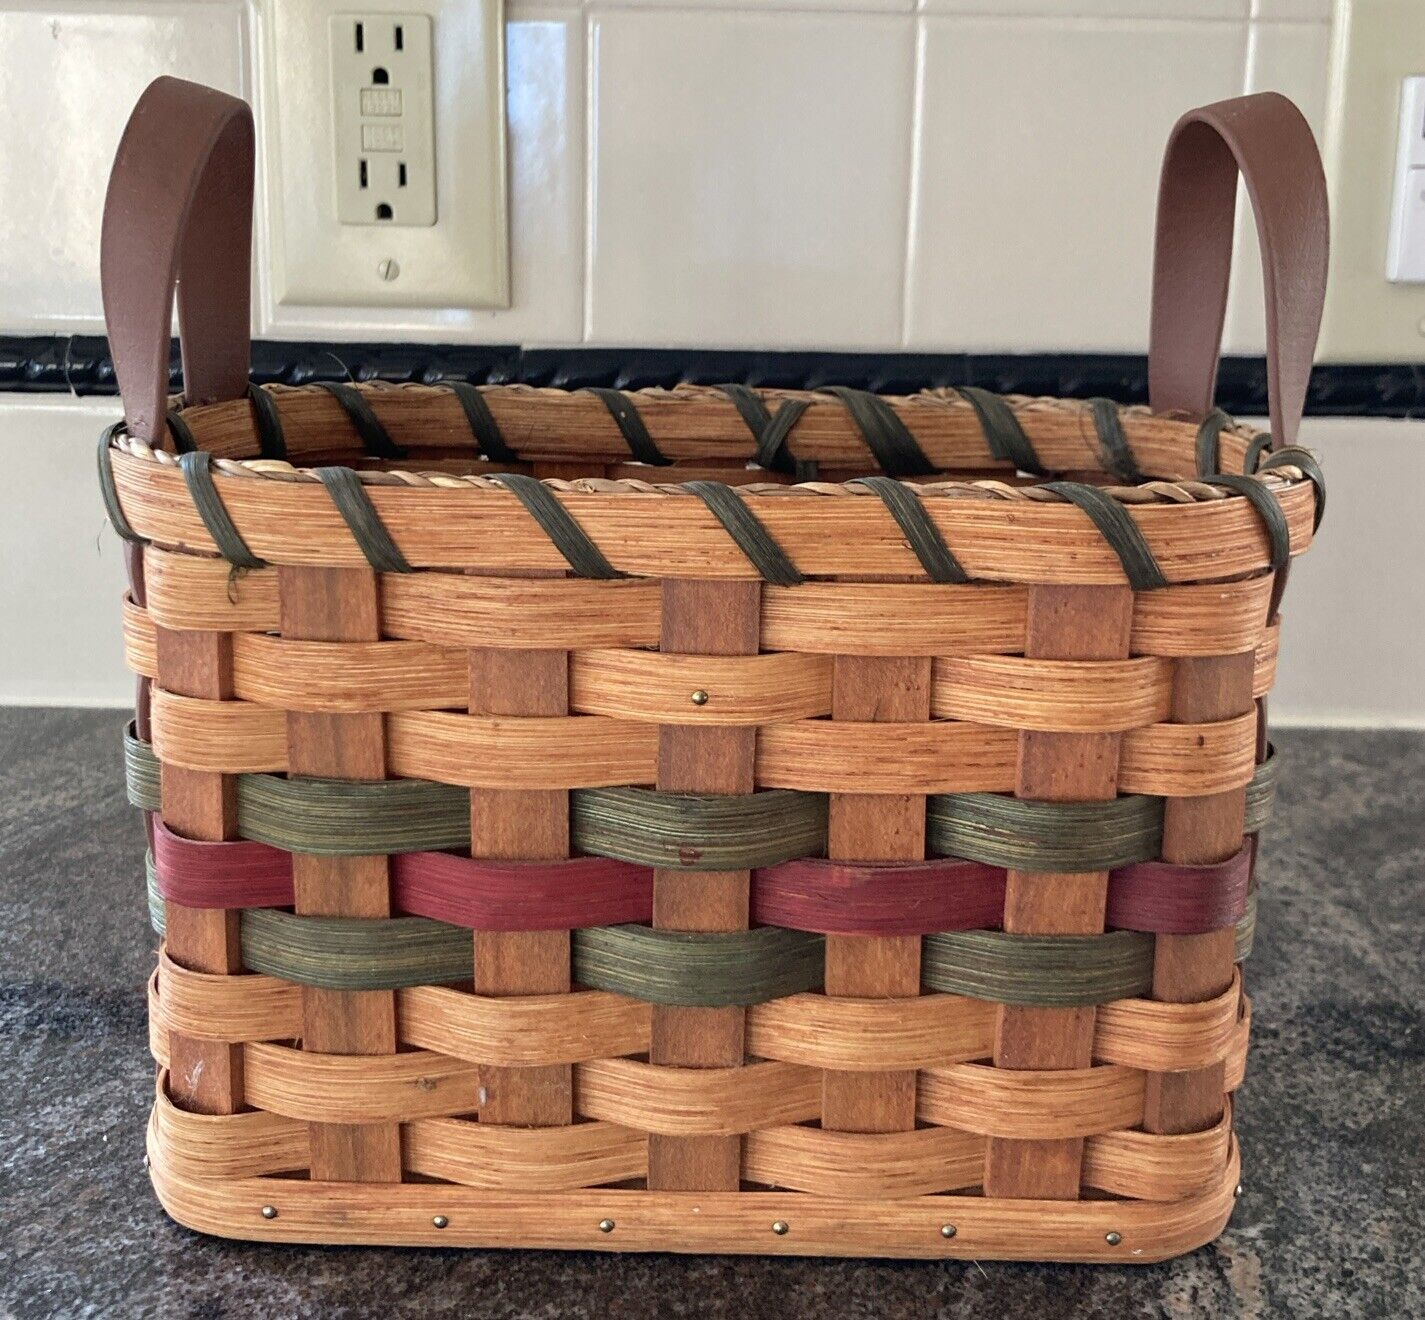 2007 Gorgeous Amish Hand Woven Divided Basket With Handles Wilmot Ohio Red Green